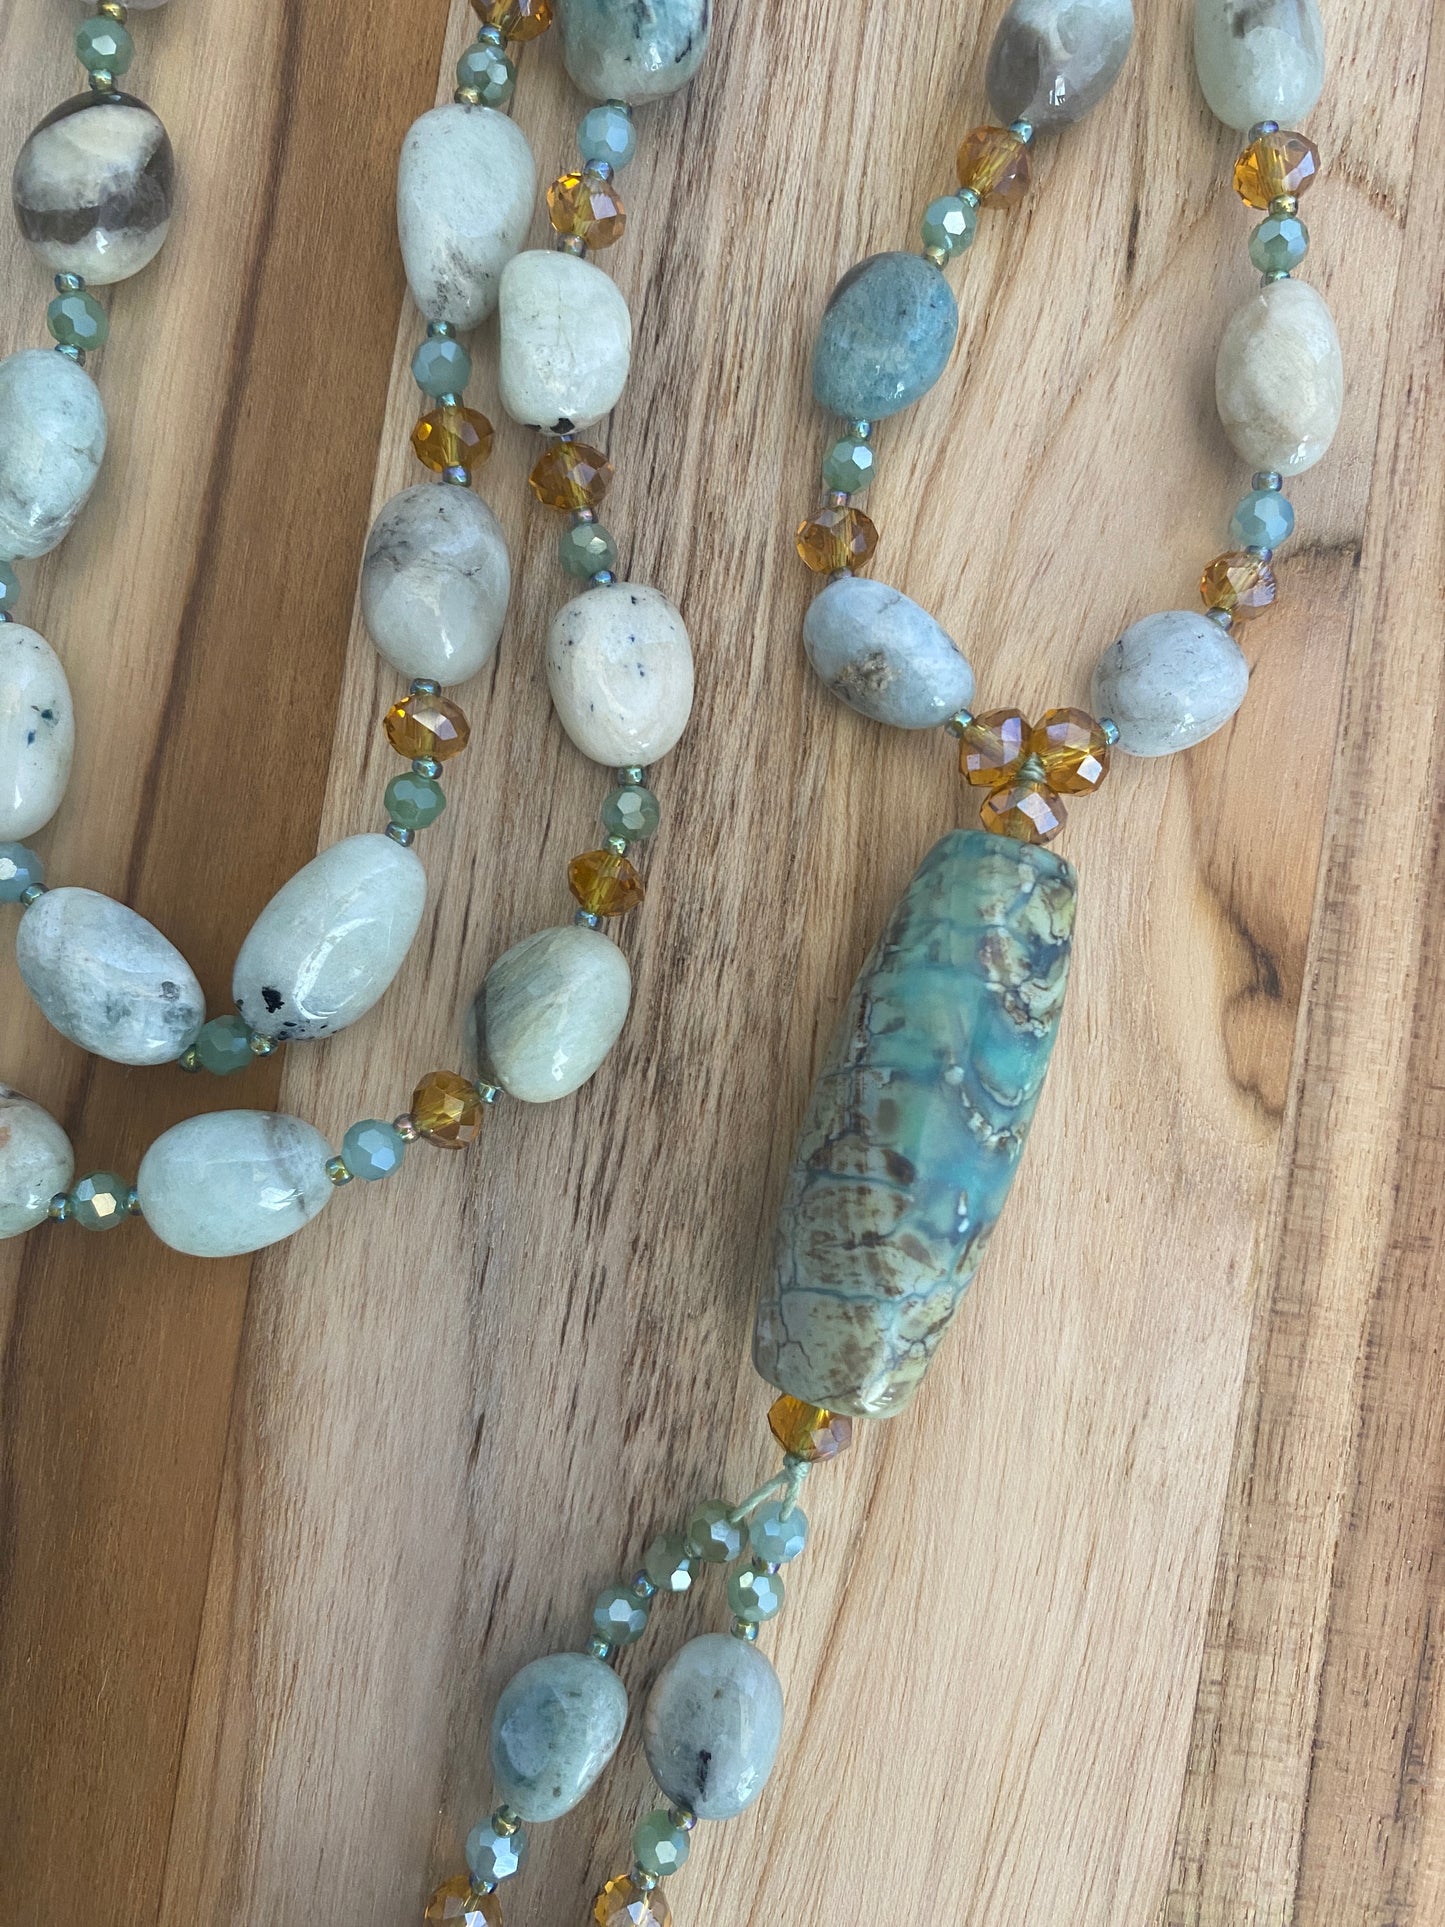 30" Long Amazonite Beaded Necklace with Agate Focal